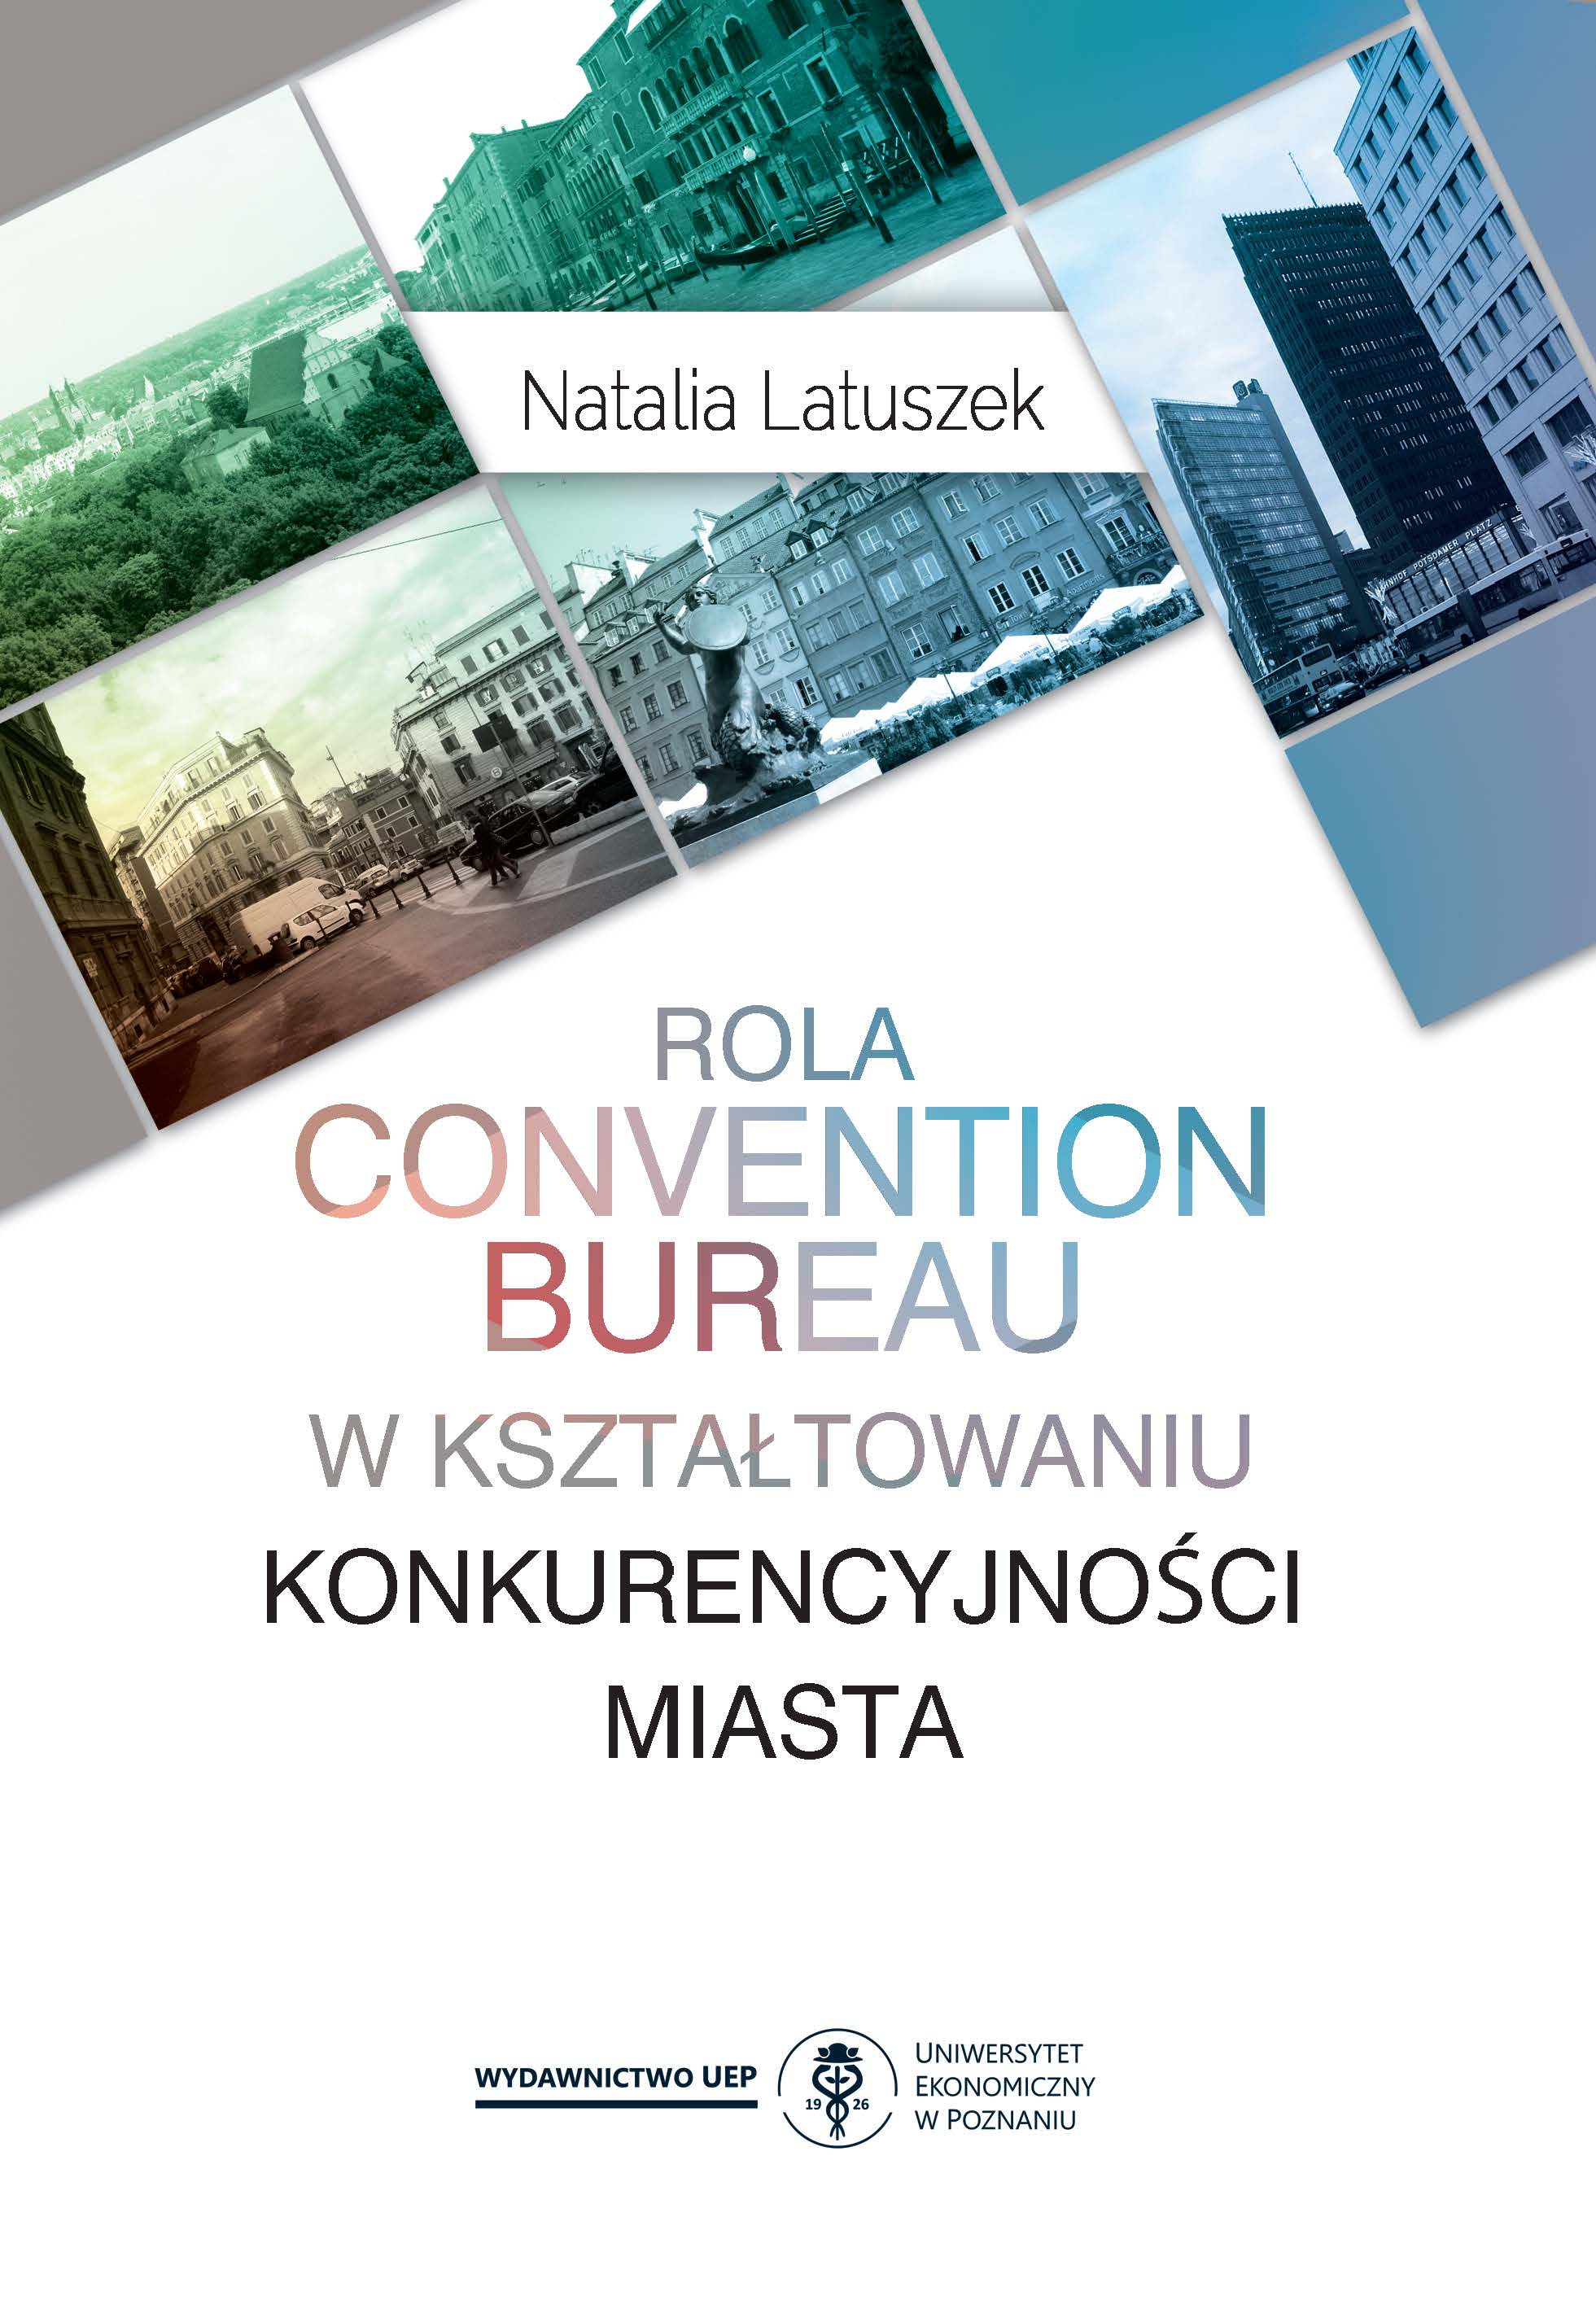 The role of convention bureau in enhancing city competitiveness